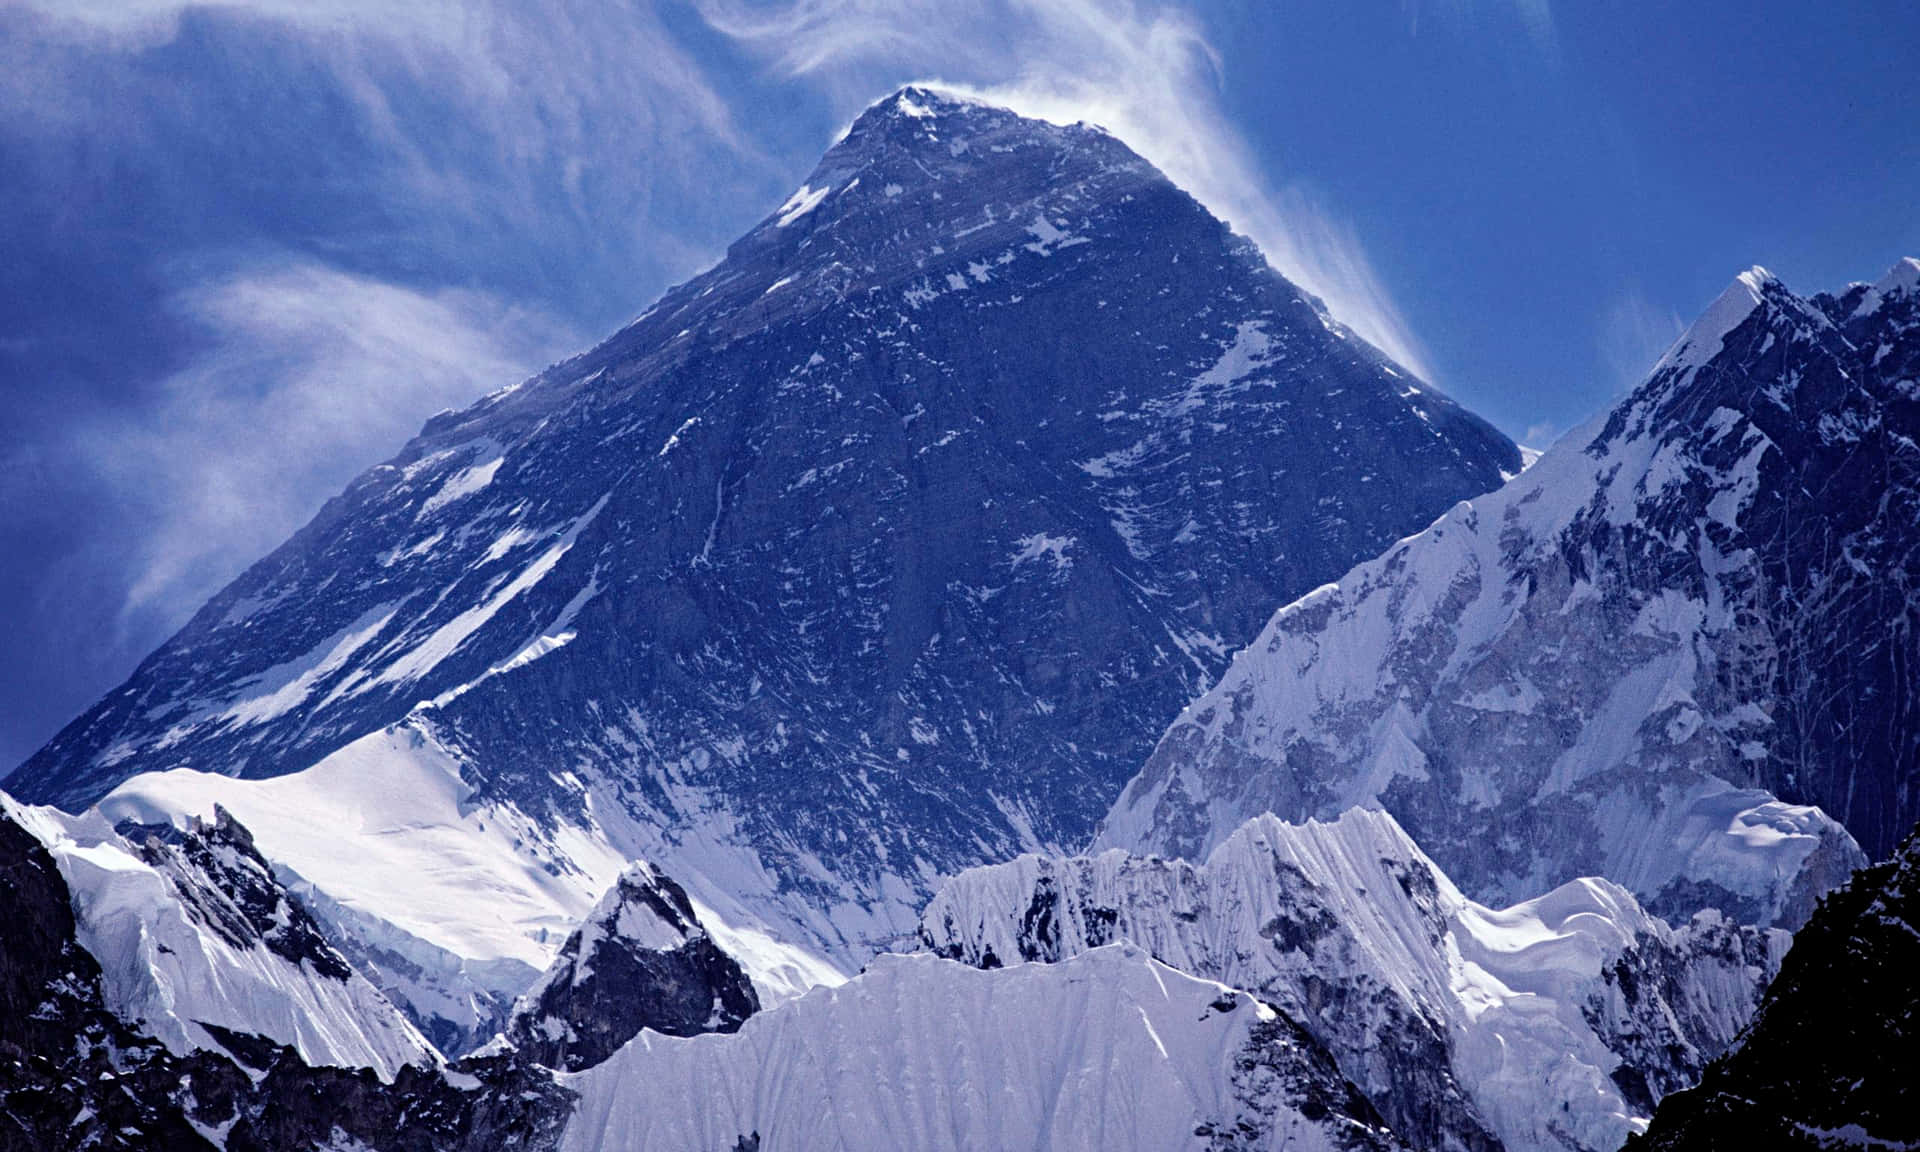 Enjoy a breathtaking view of the majestic Mount Everest